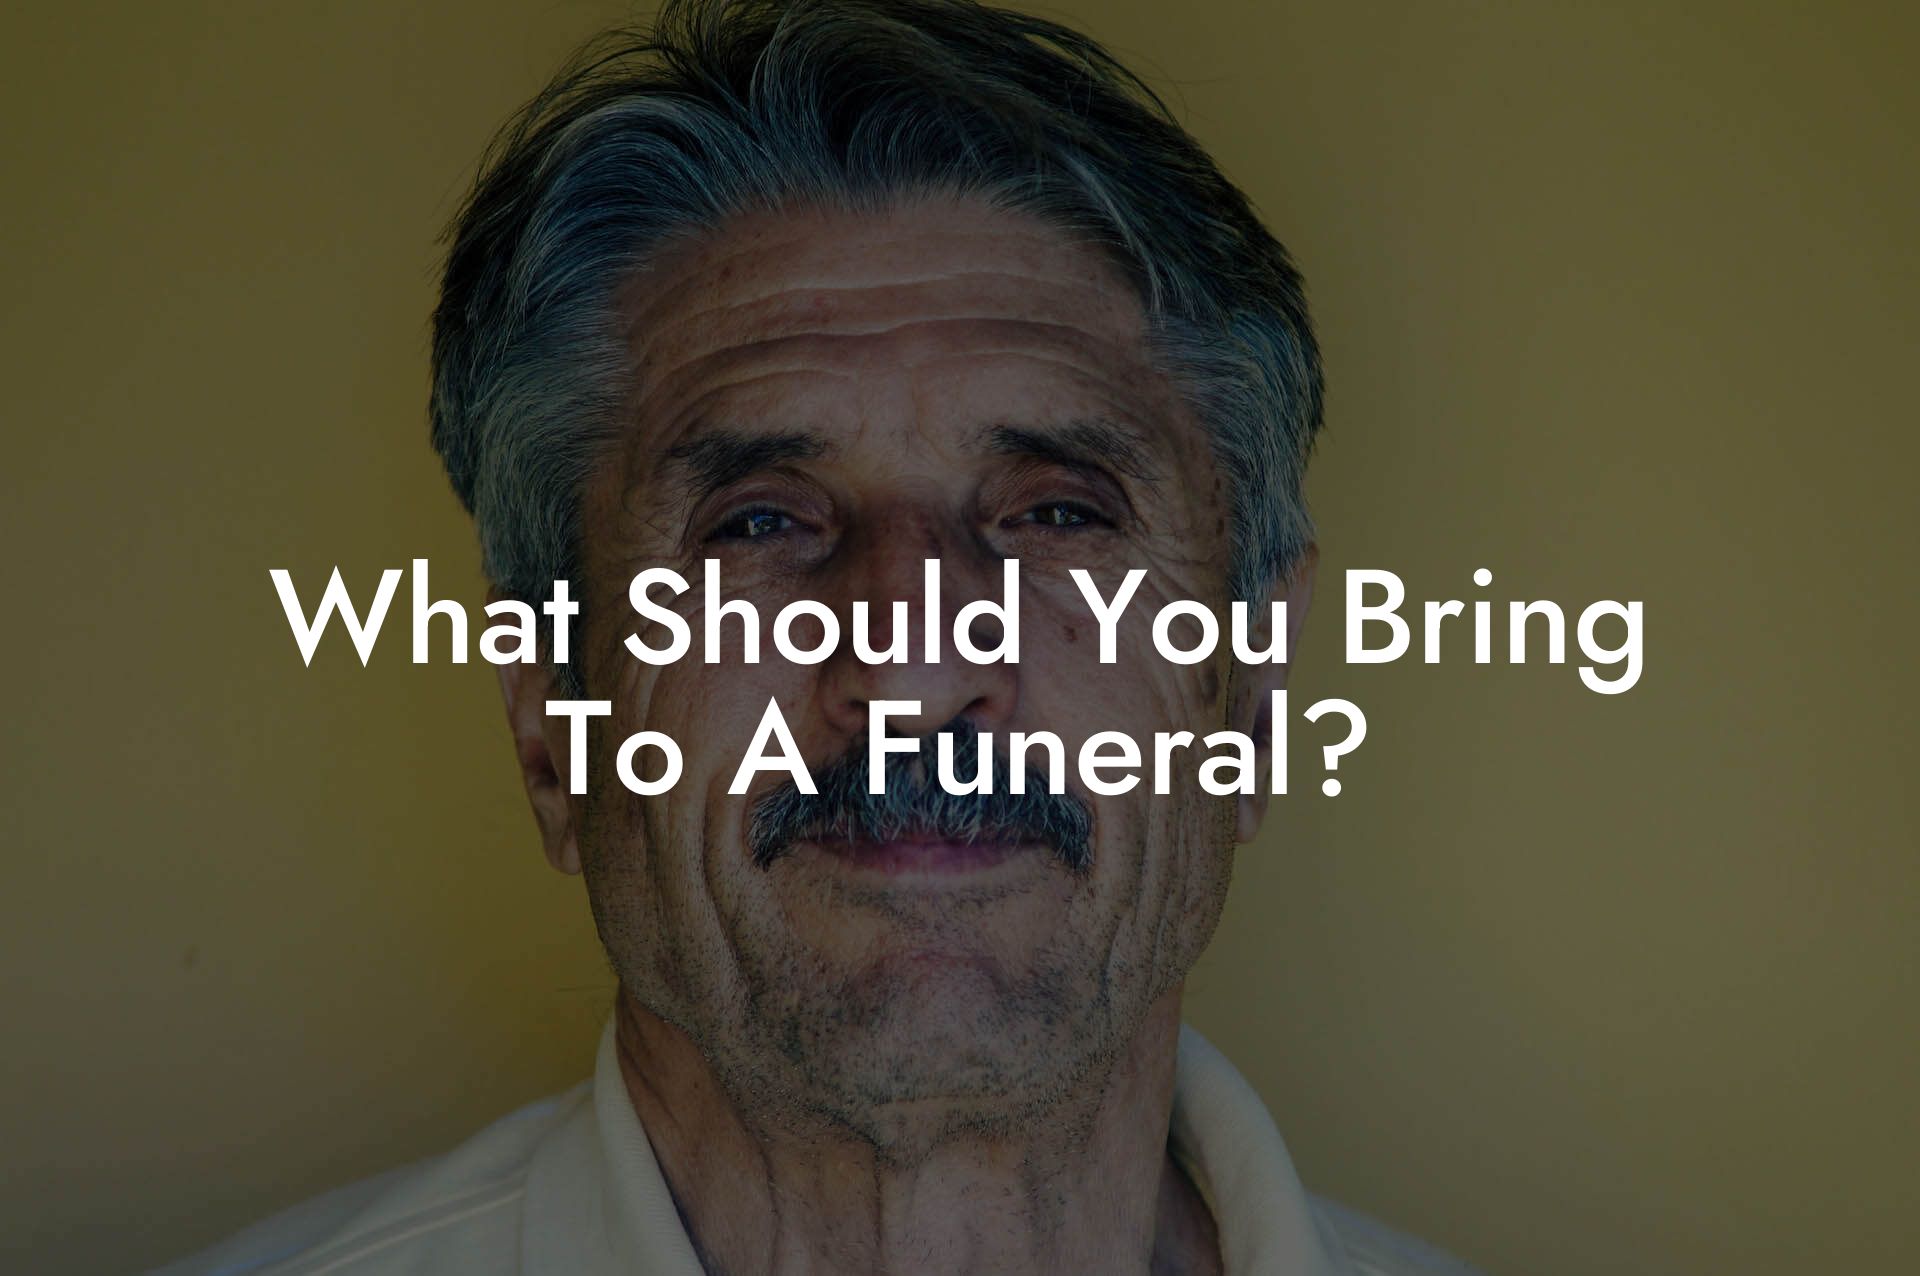 What Should You Bring To A Funeral?